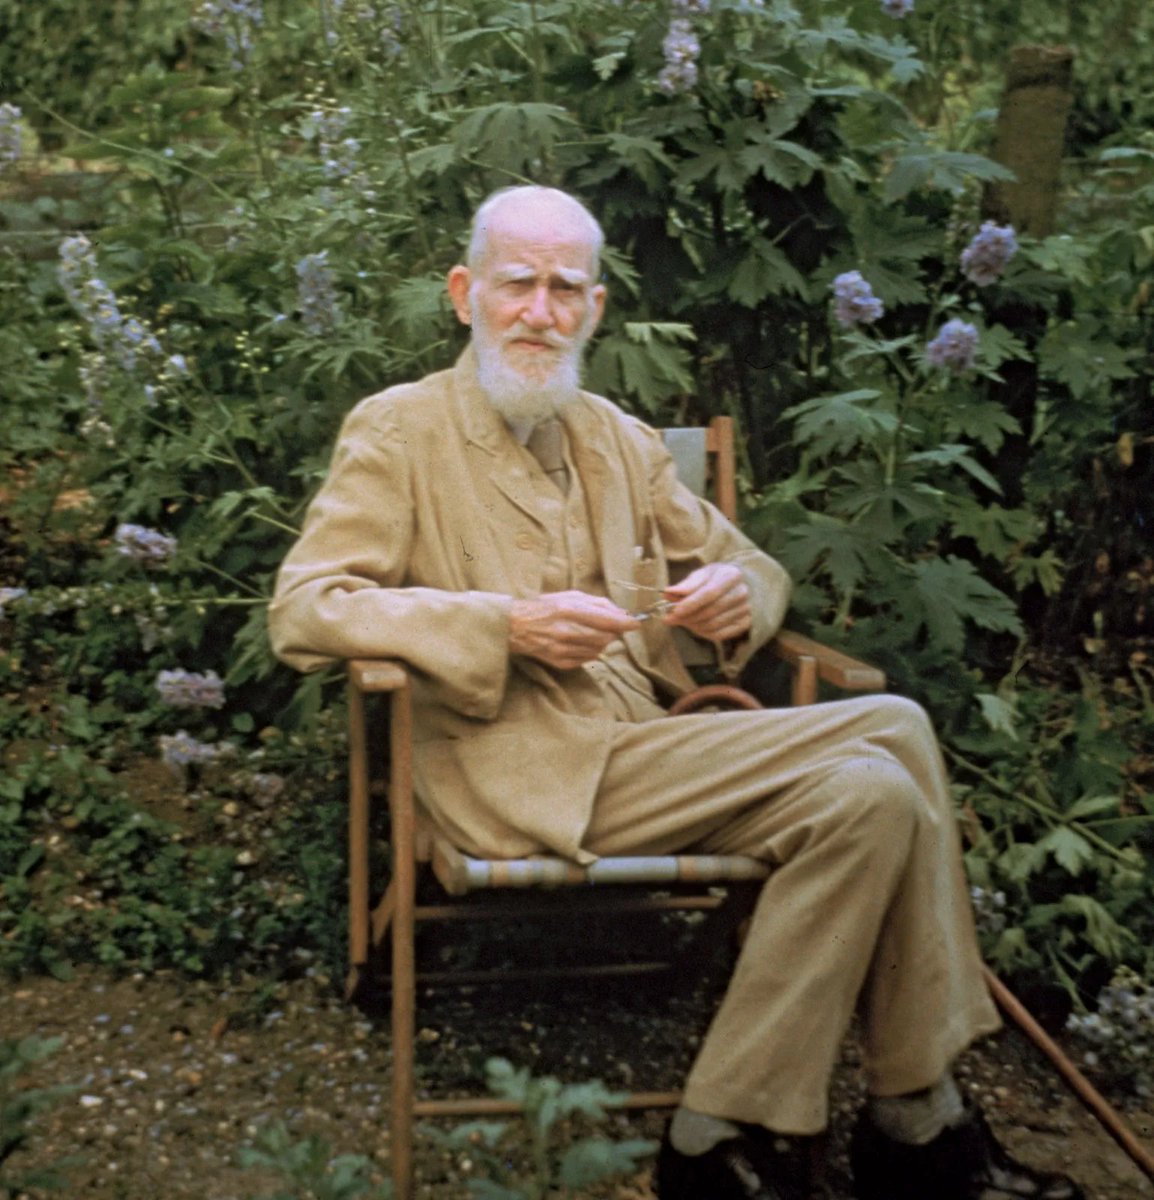 “Life isn't about finding yourself. Life is about creating yourself.”

#GeorgeBernardShaw